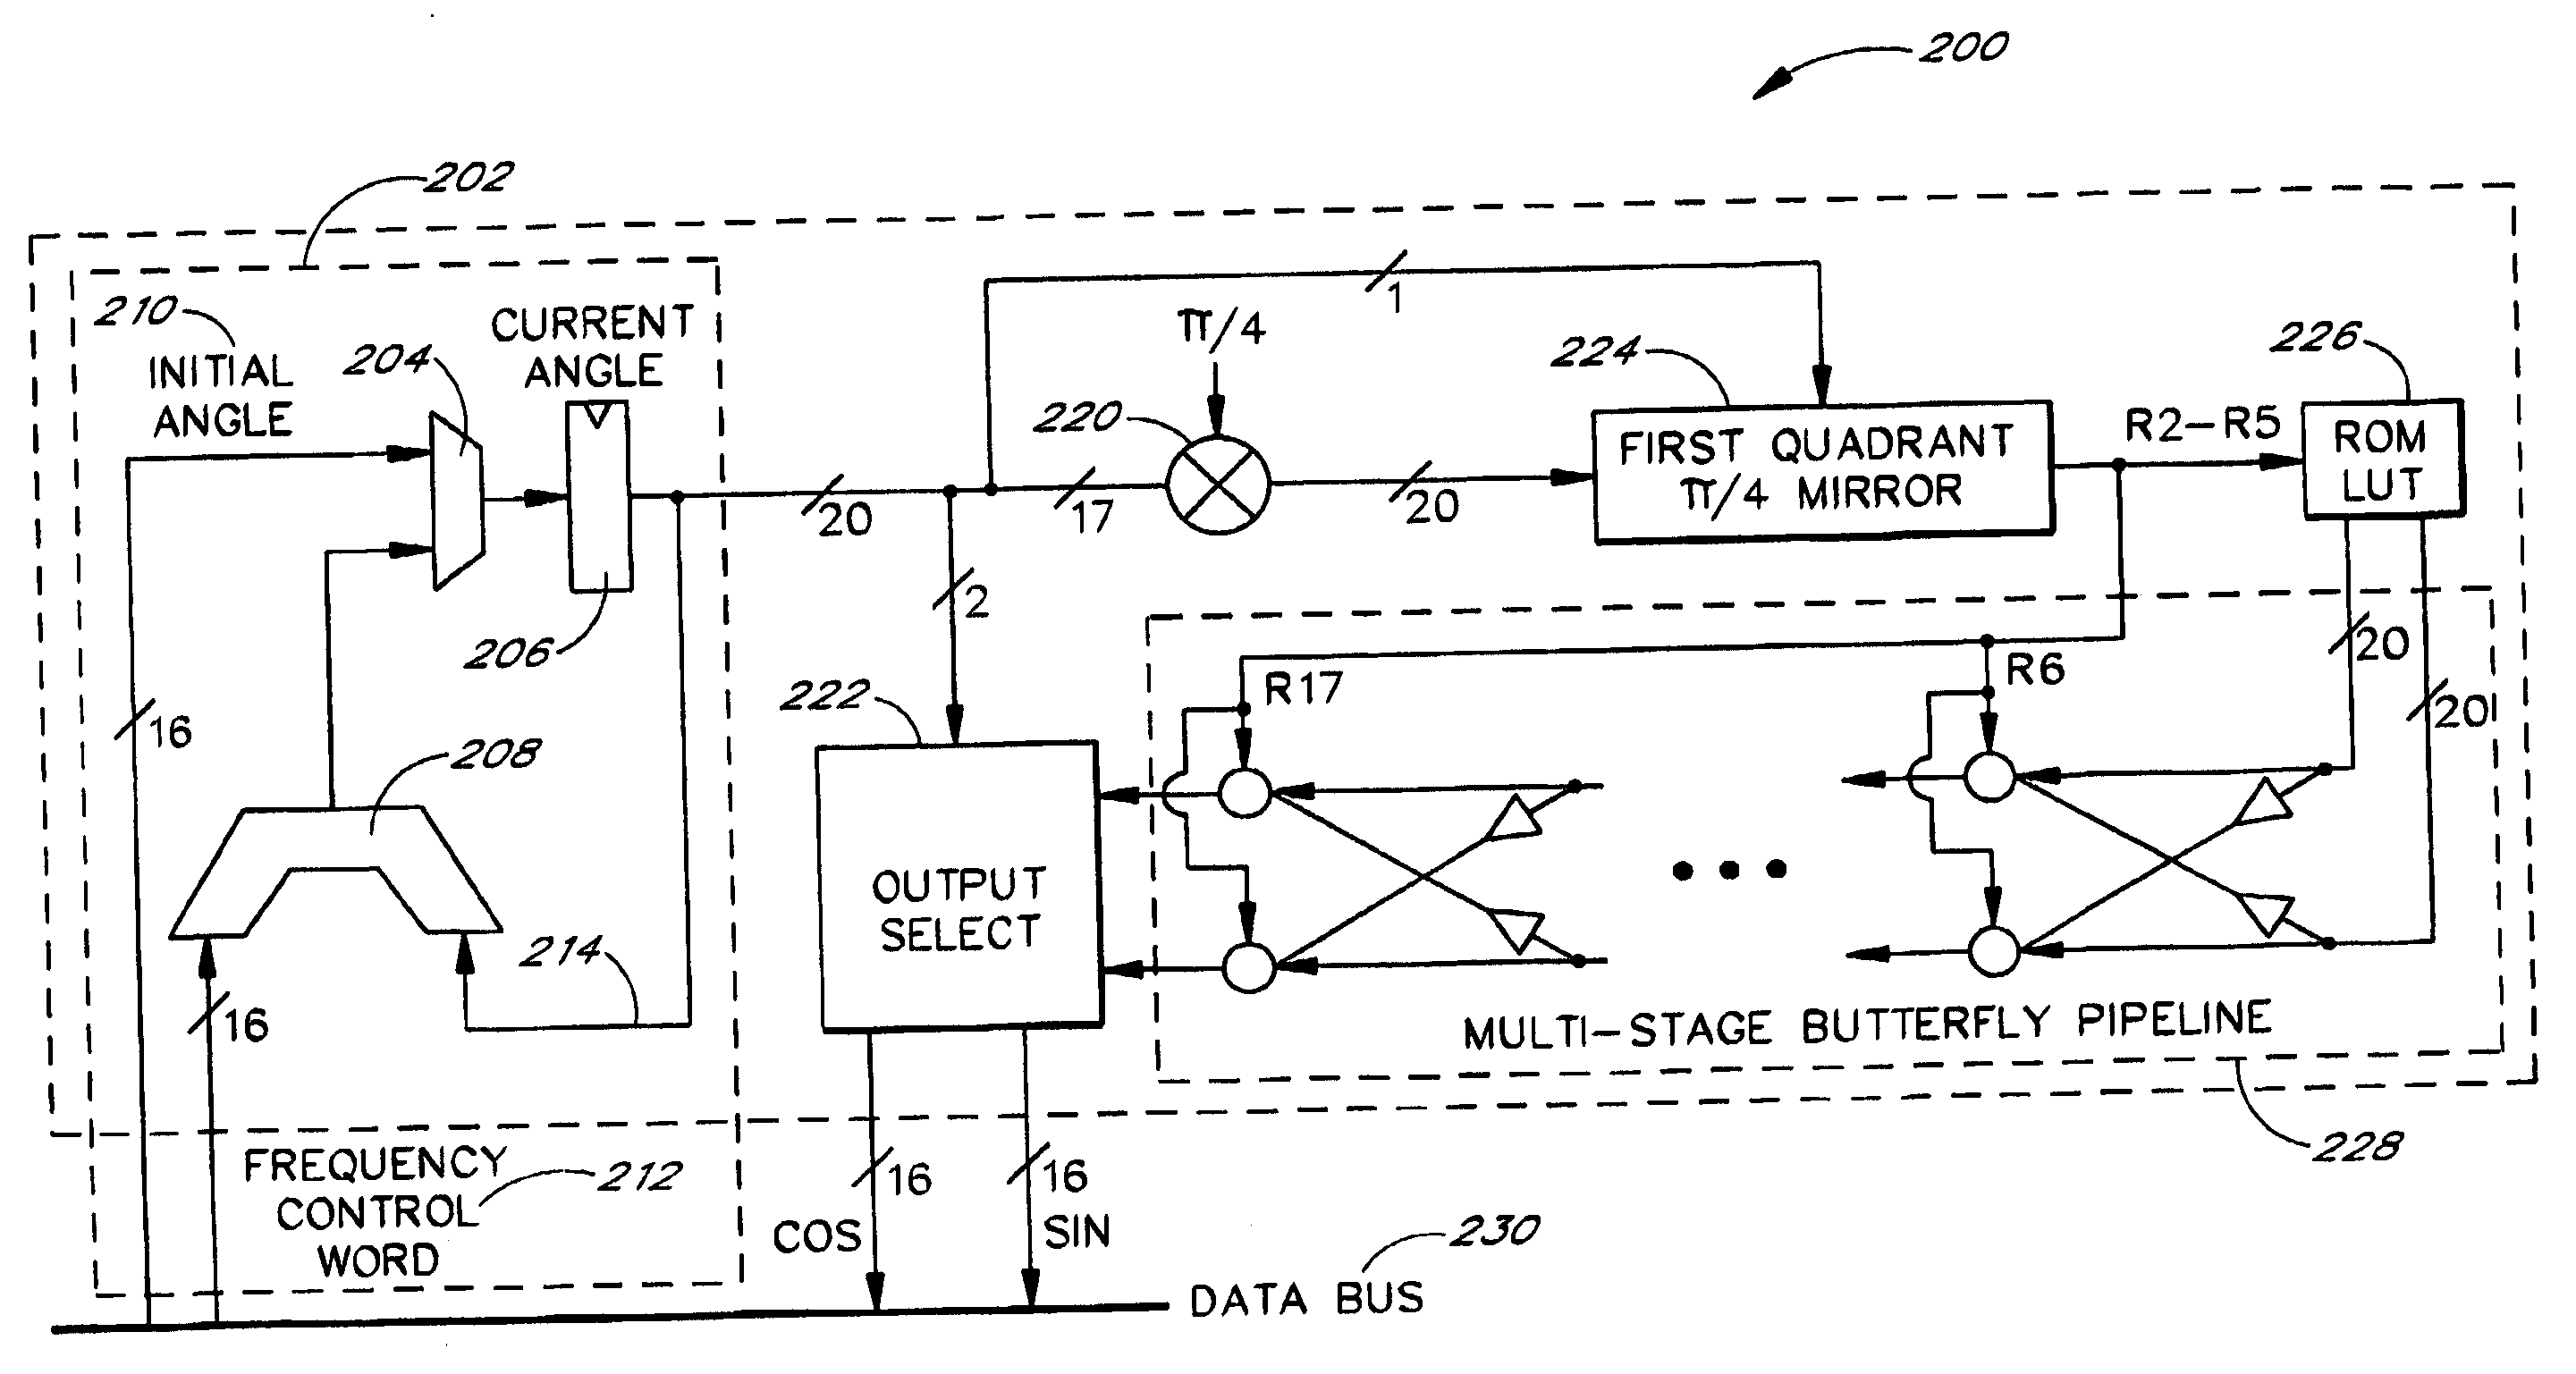 Hardware function generator support in a DSP